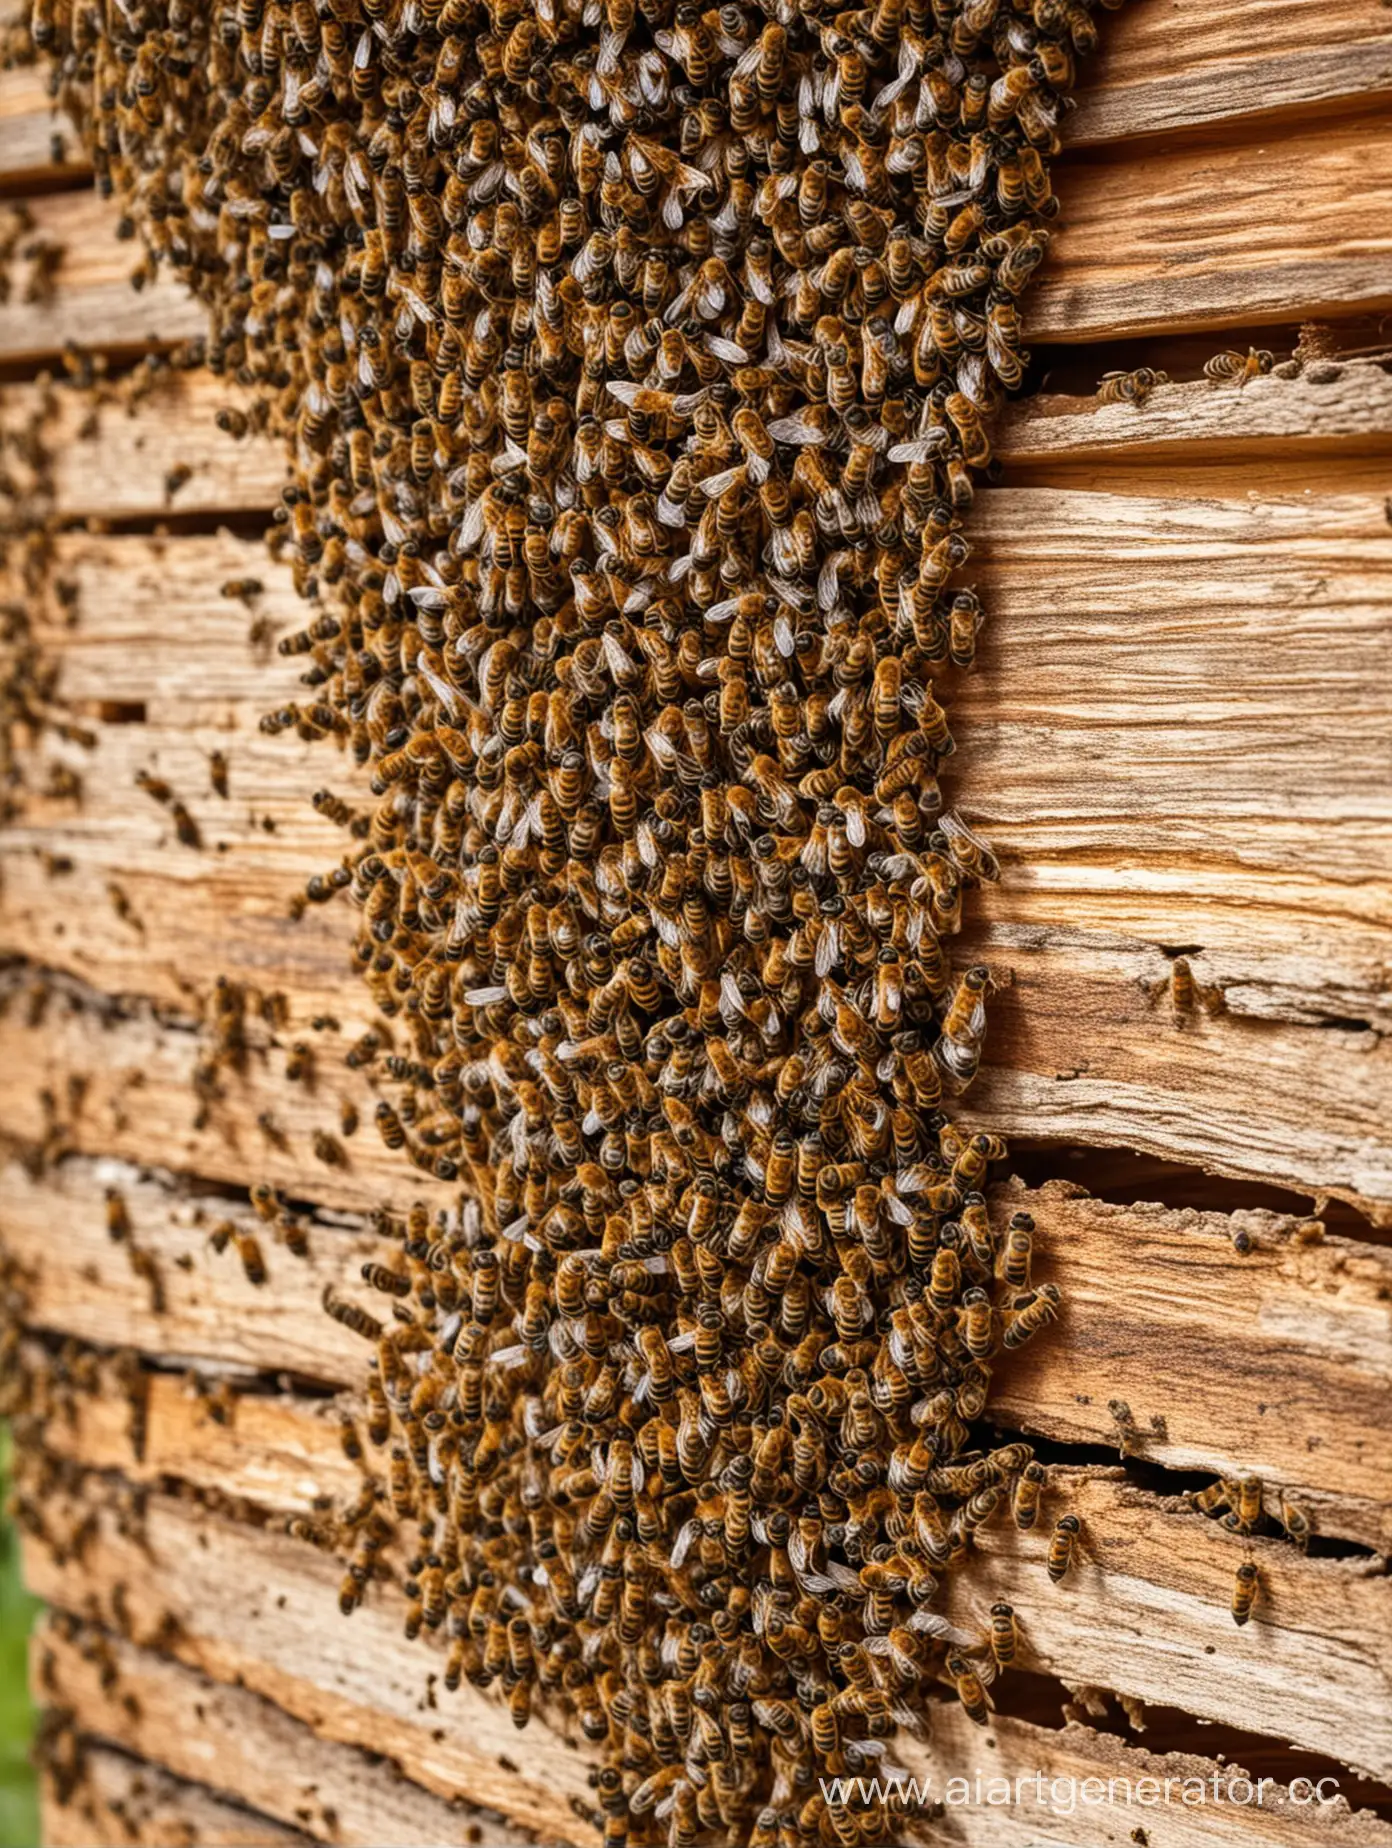 Bees-Swarm-in-Migration-from-the-Hive